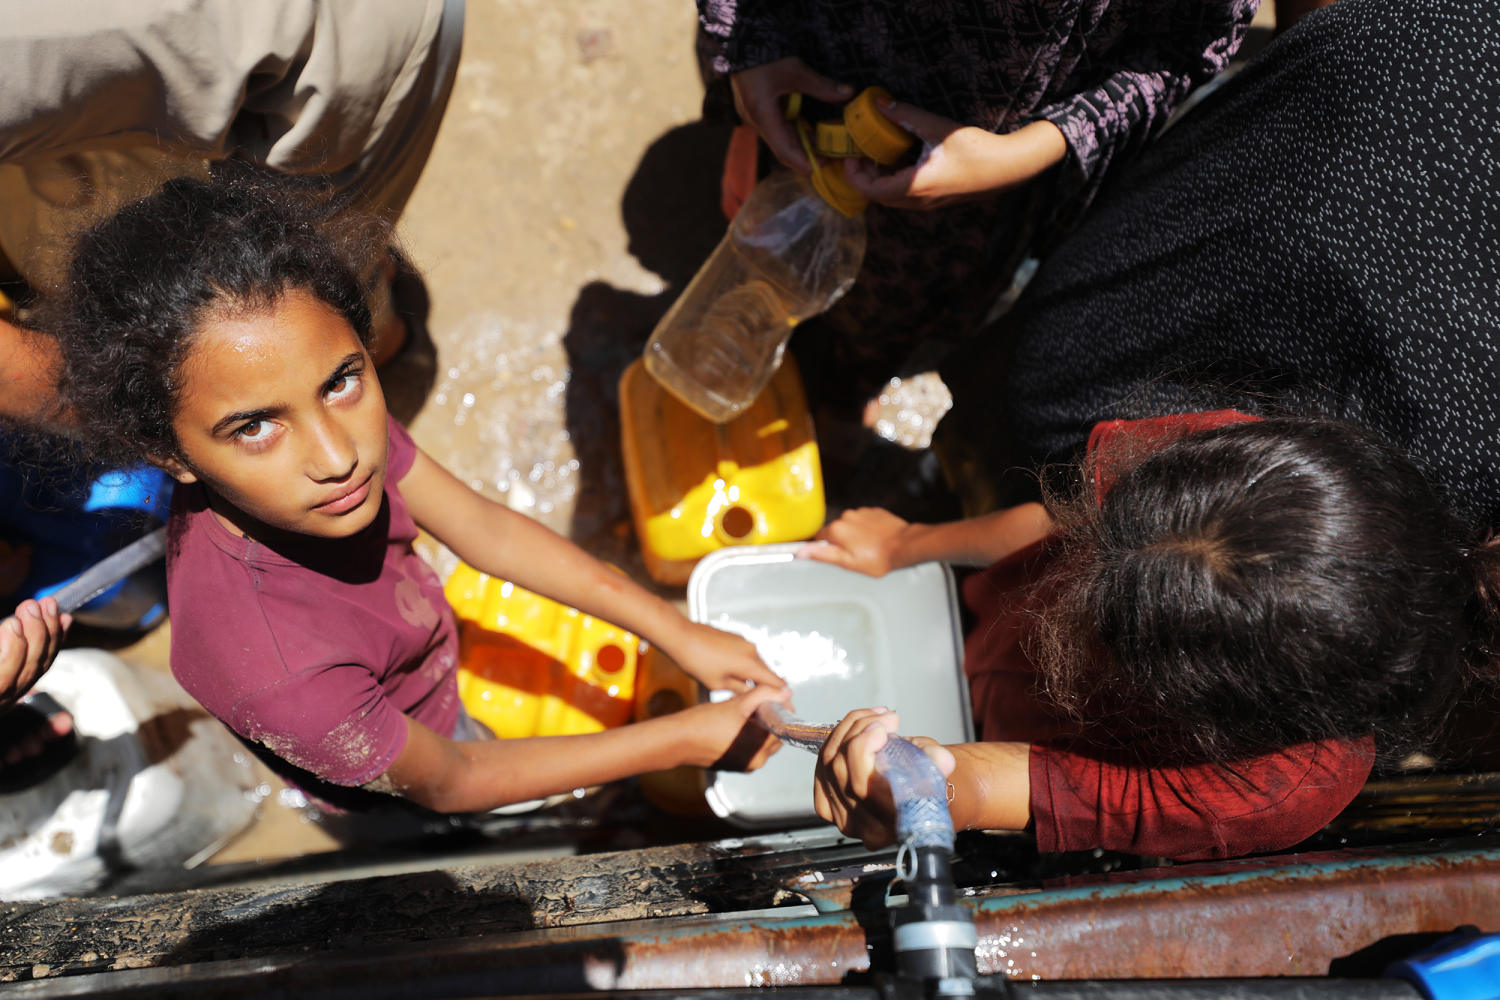 Heavily populated areas of Gaza are running out of water at an alarming rate